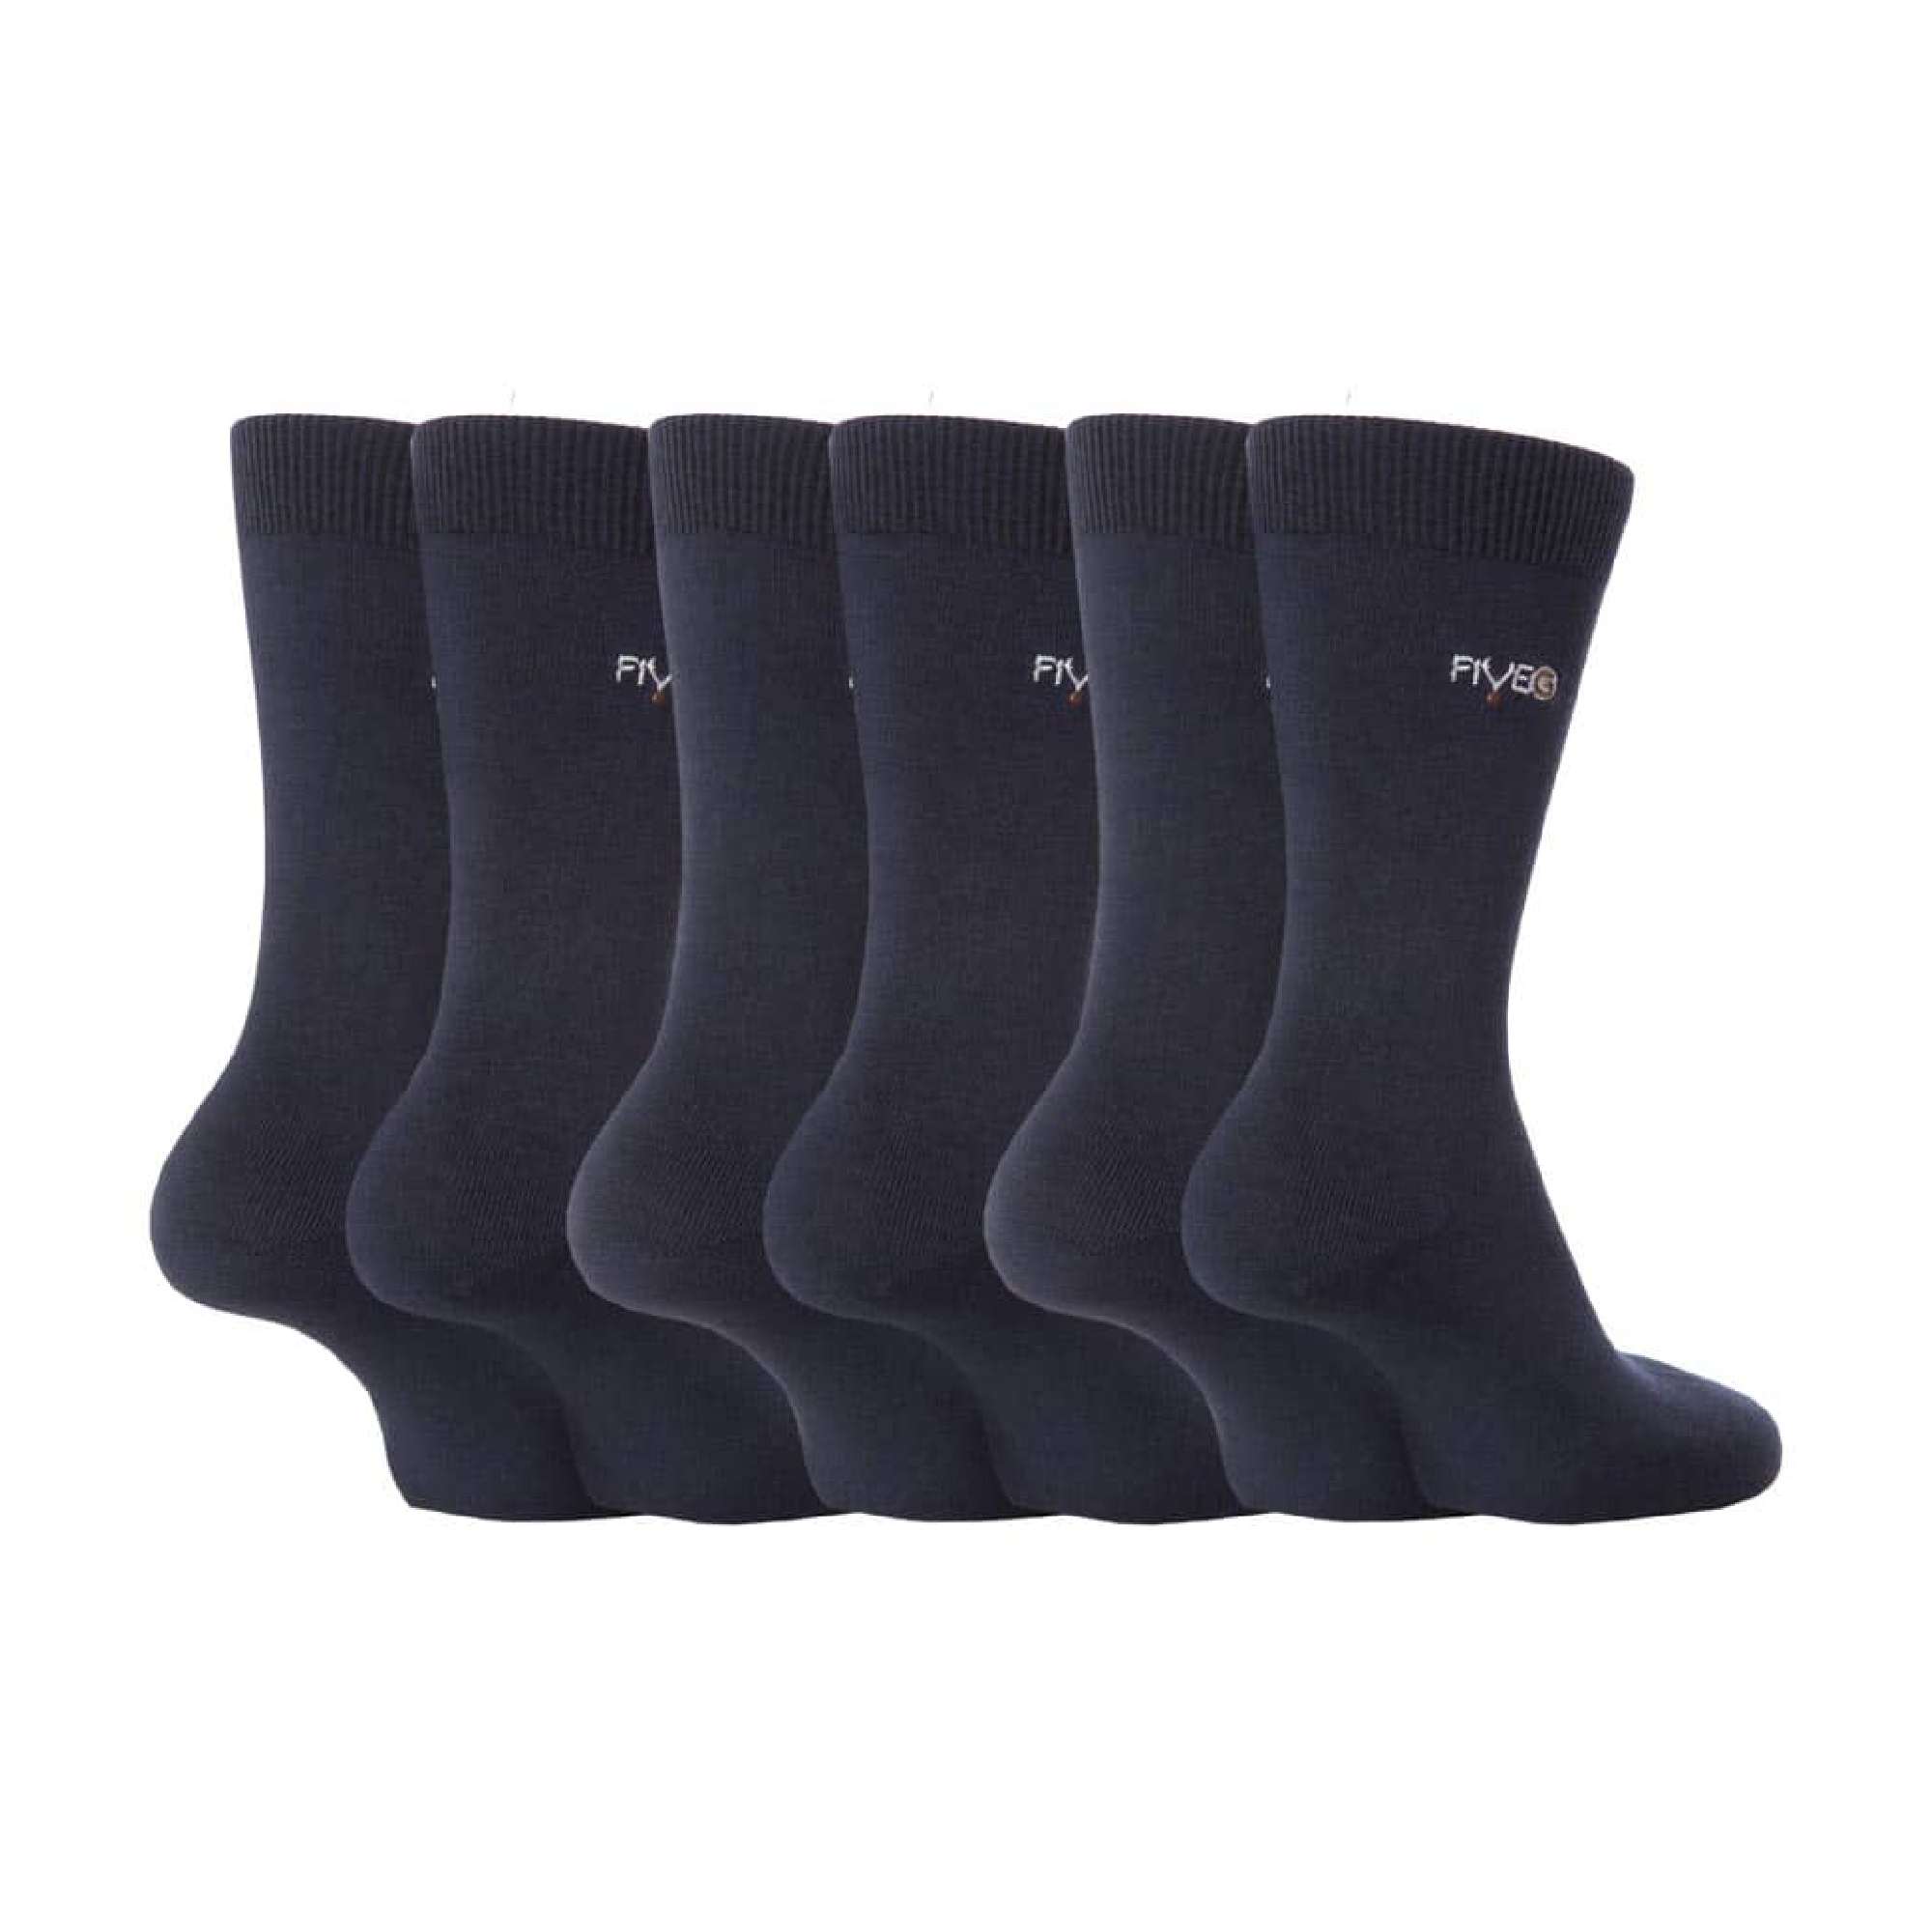 6 Pack Mens Plain Coloured Socks Made with Fairtrade Cotton - Sock Snob